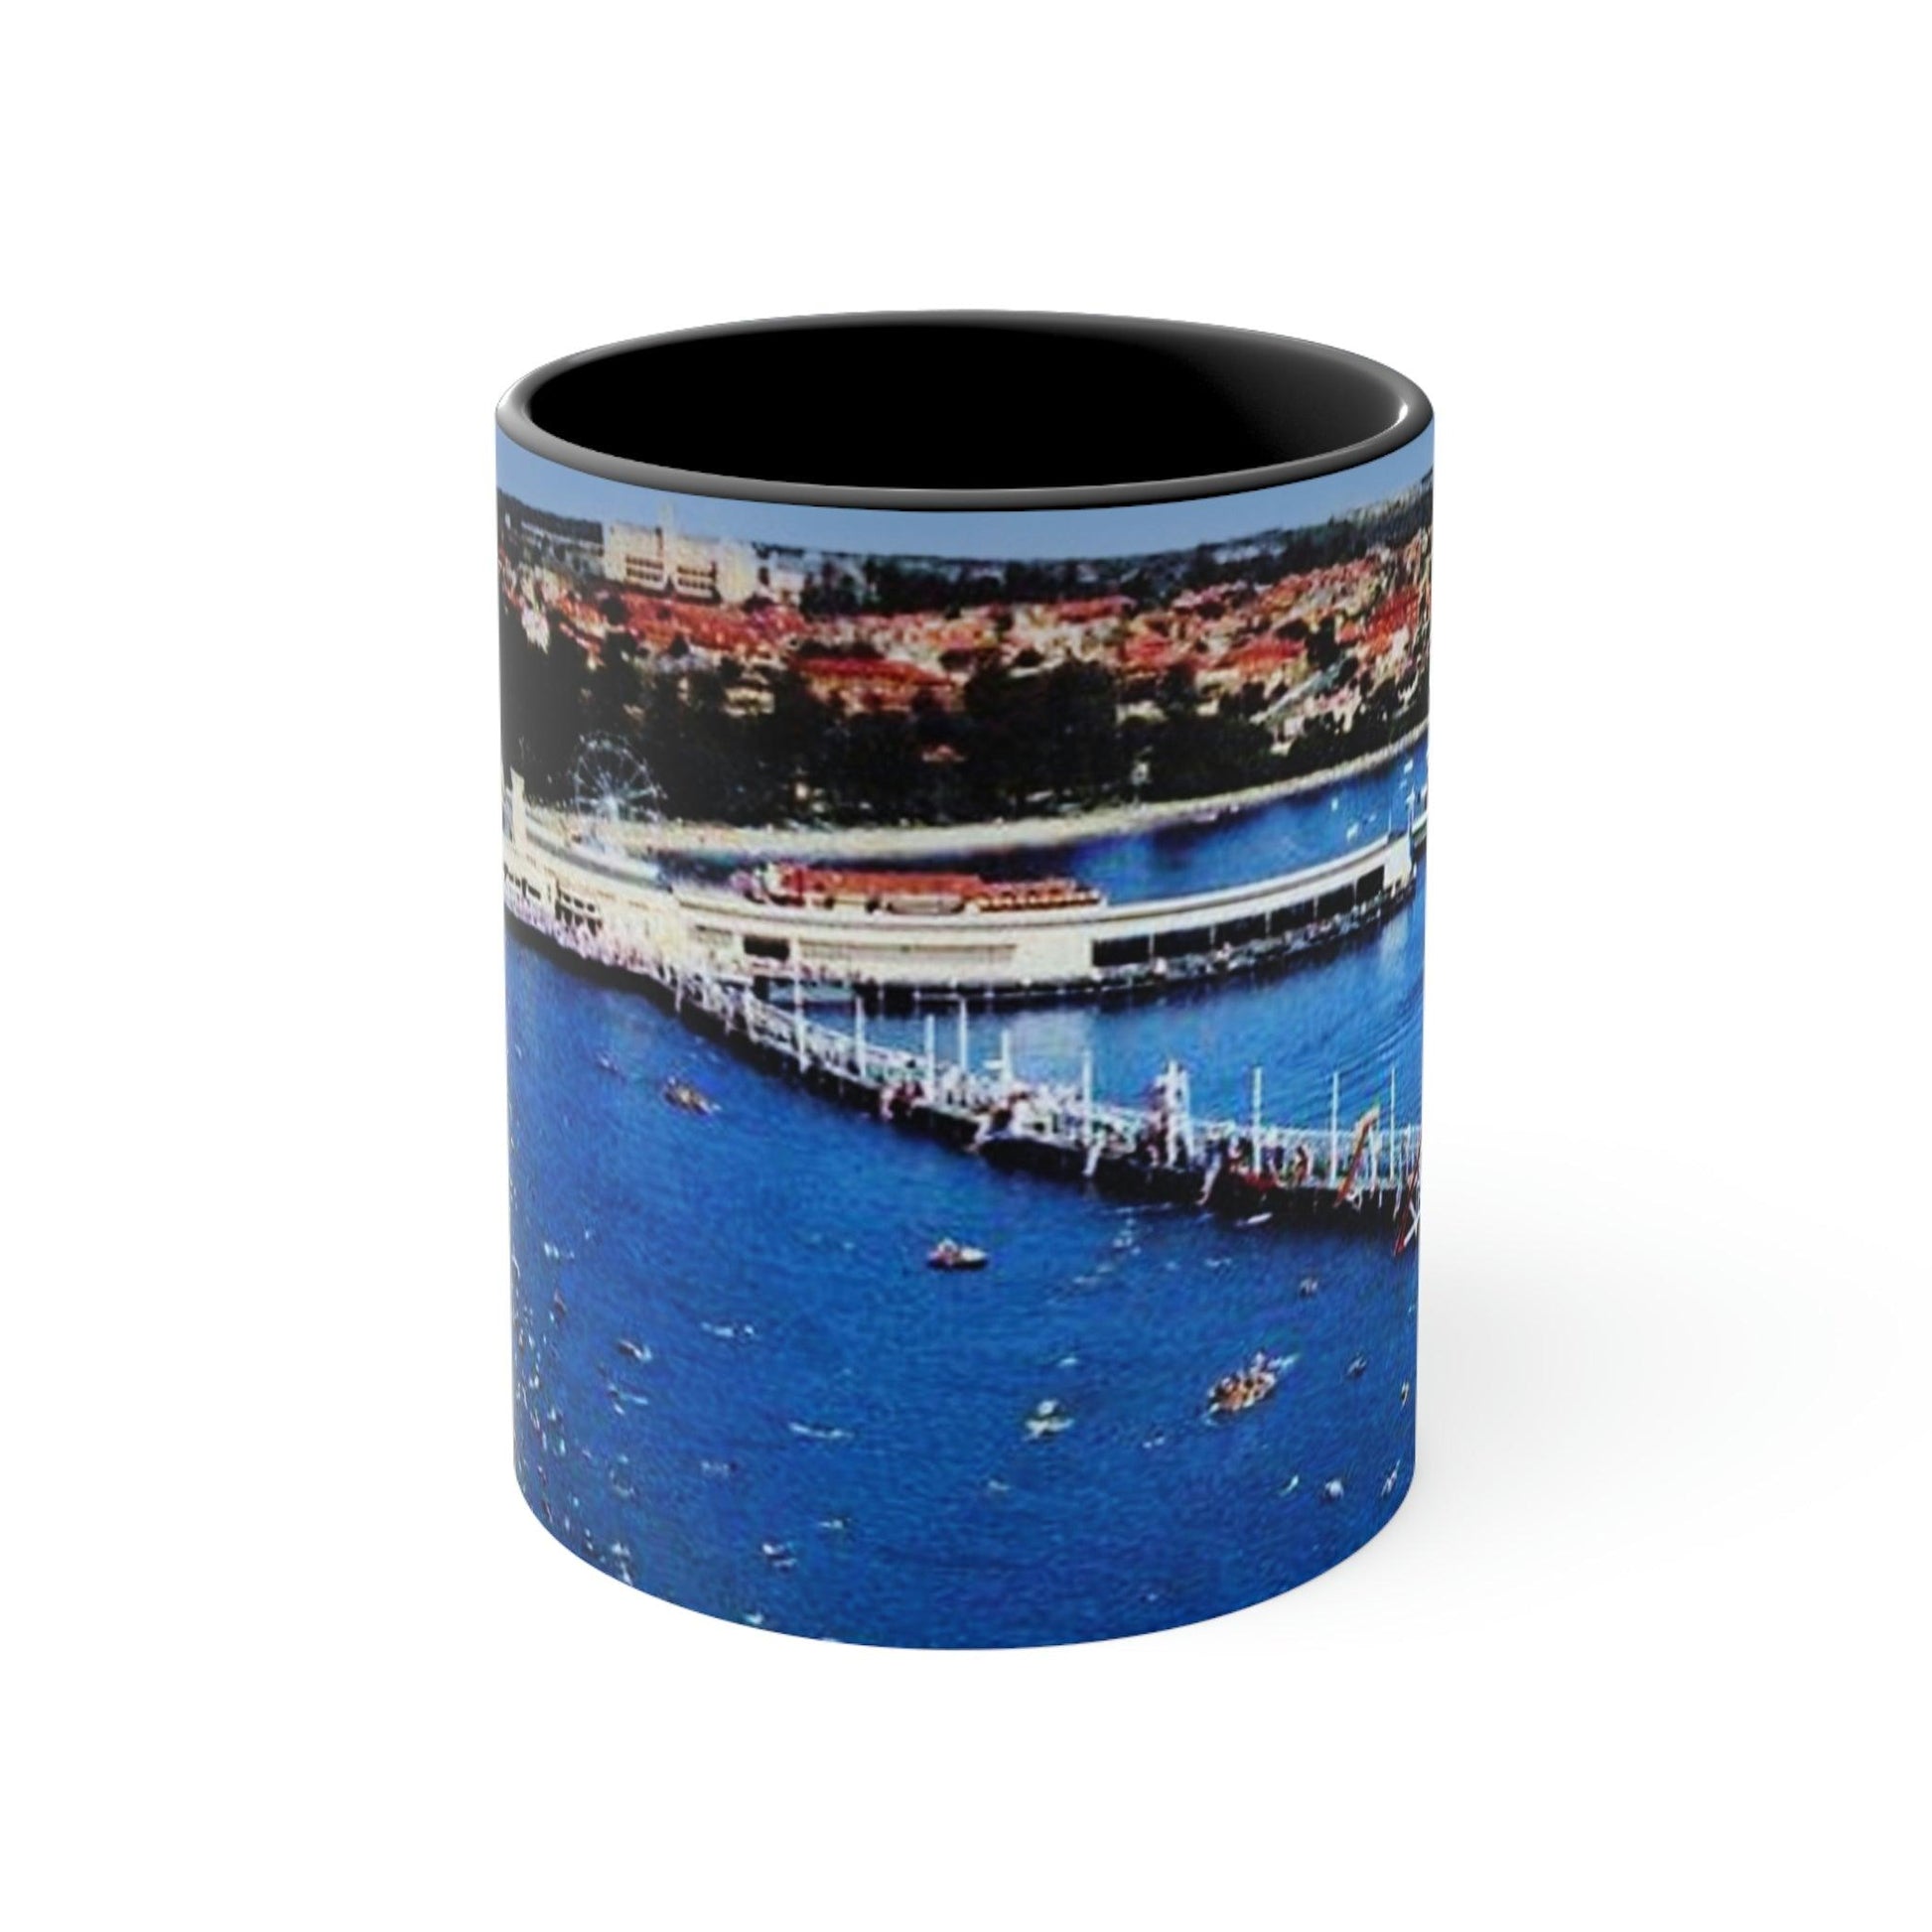 Colourful Accent Mug with Manly Promenade and Harbour Pool 1955 - Lost Manly Shop